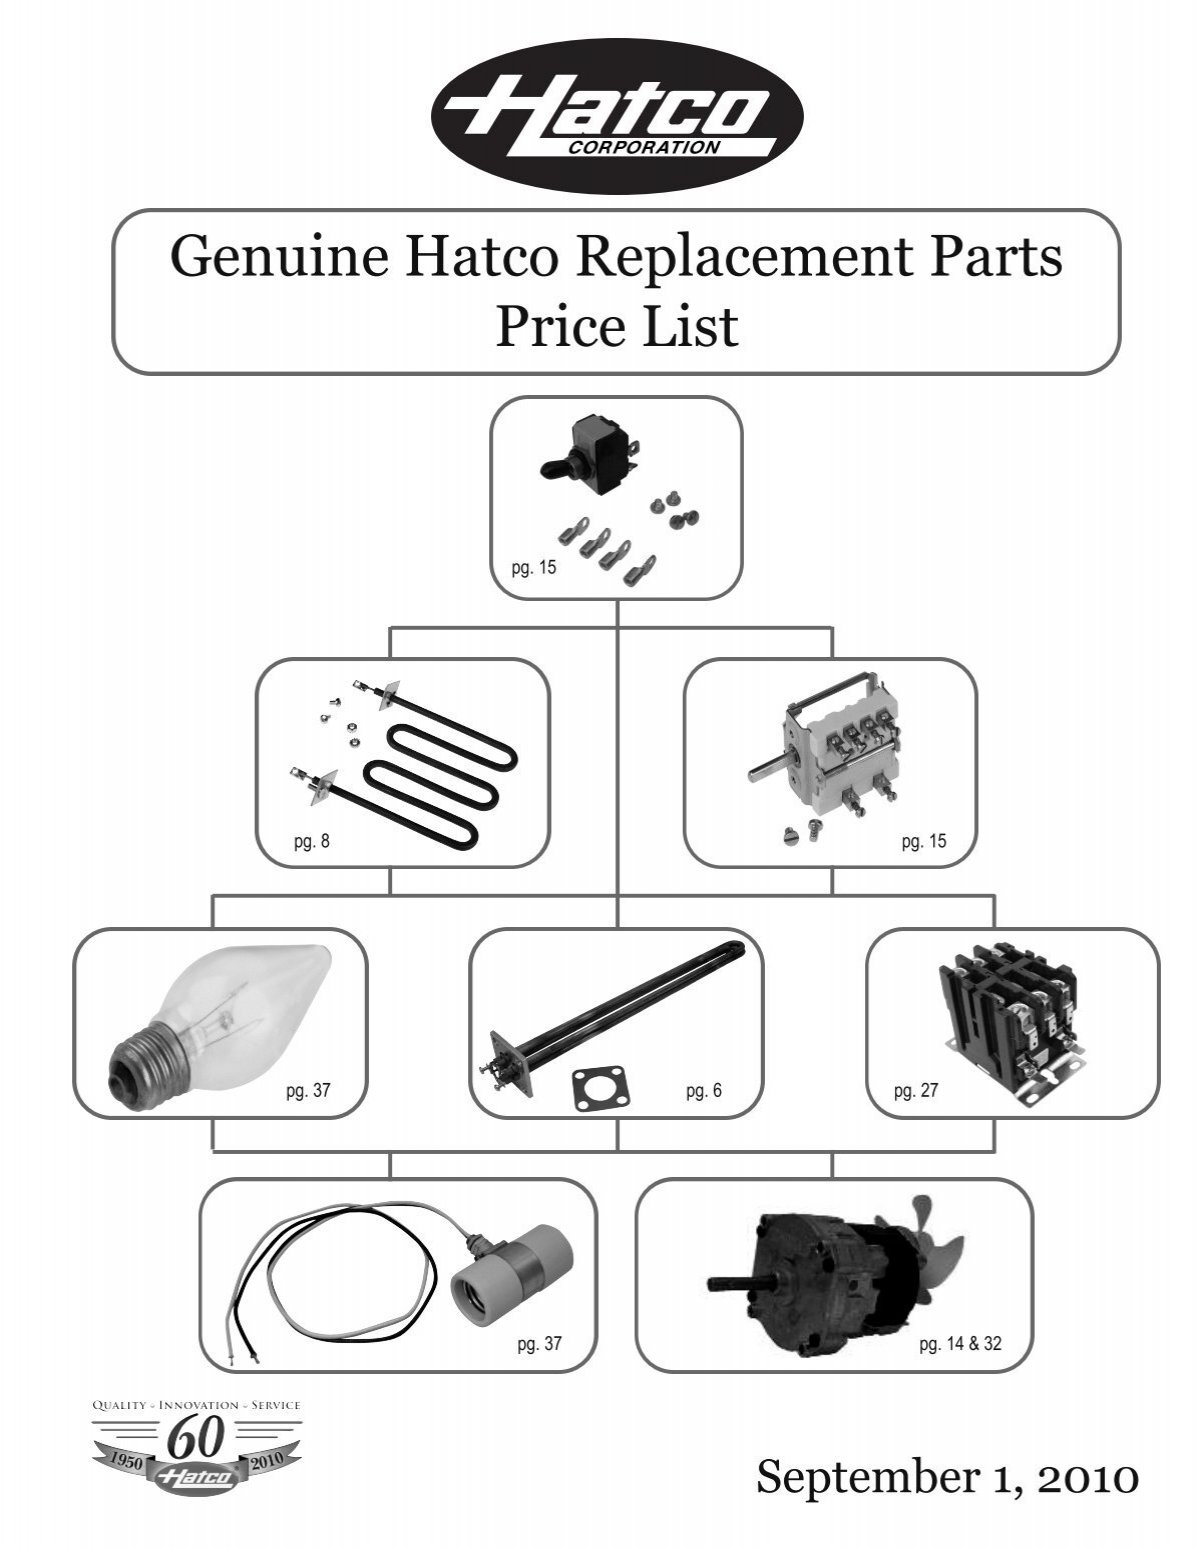 Genuine Hatco Replacement Parts Price List - HD Sheldon and Co.